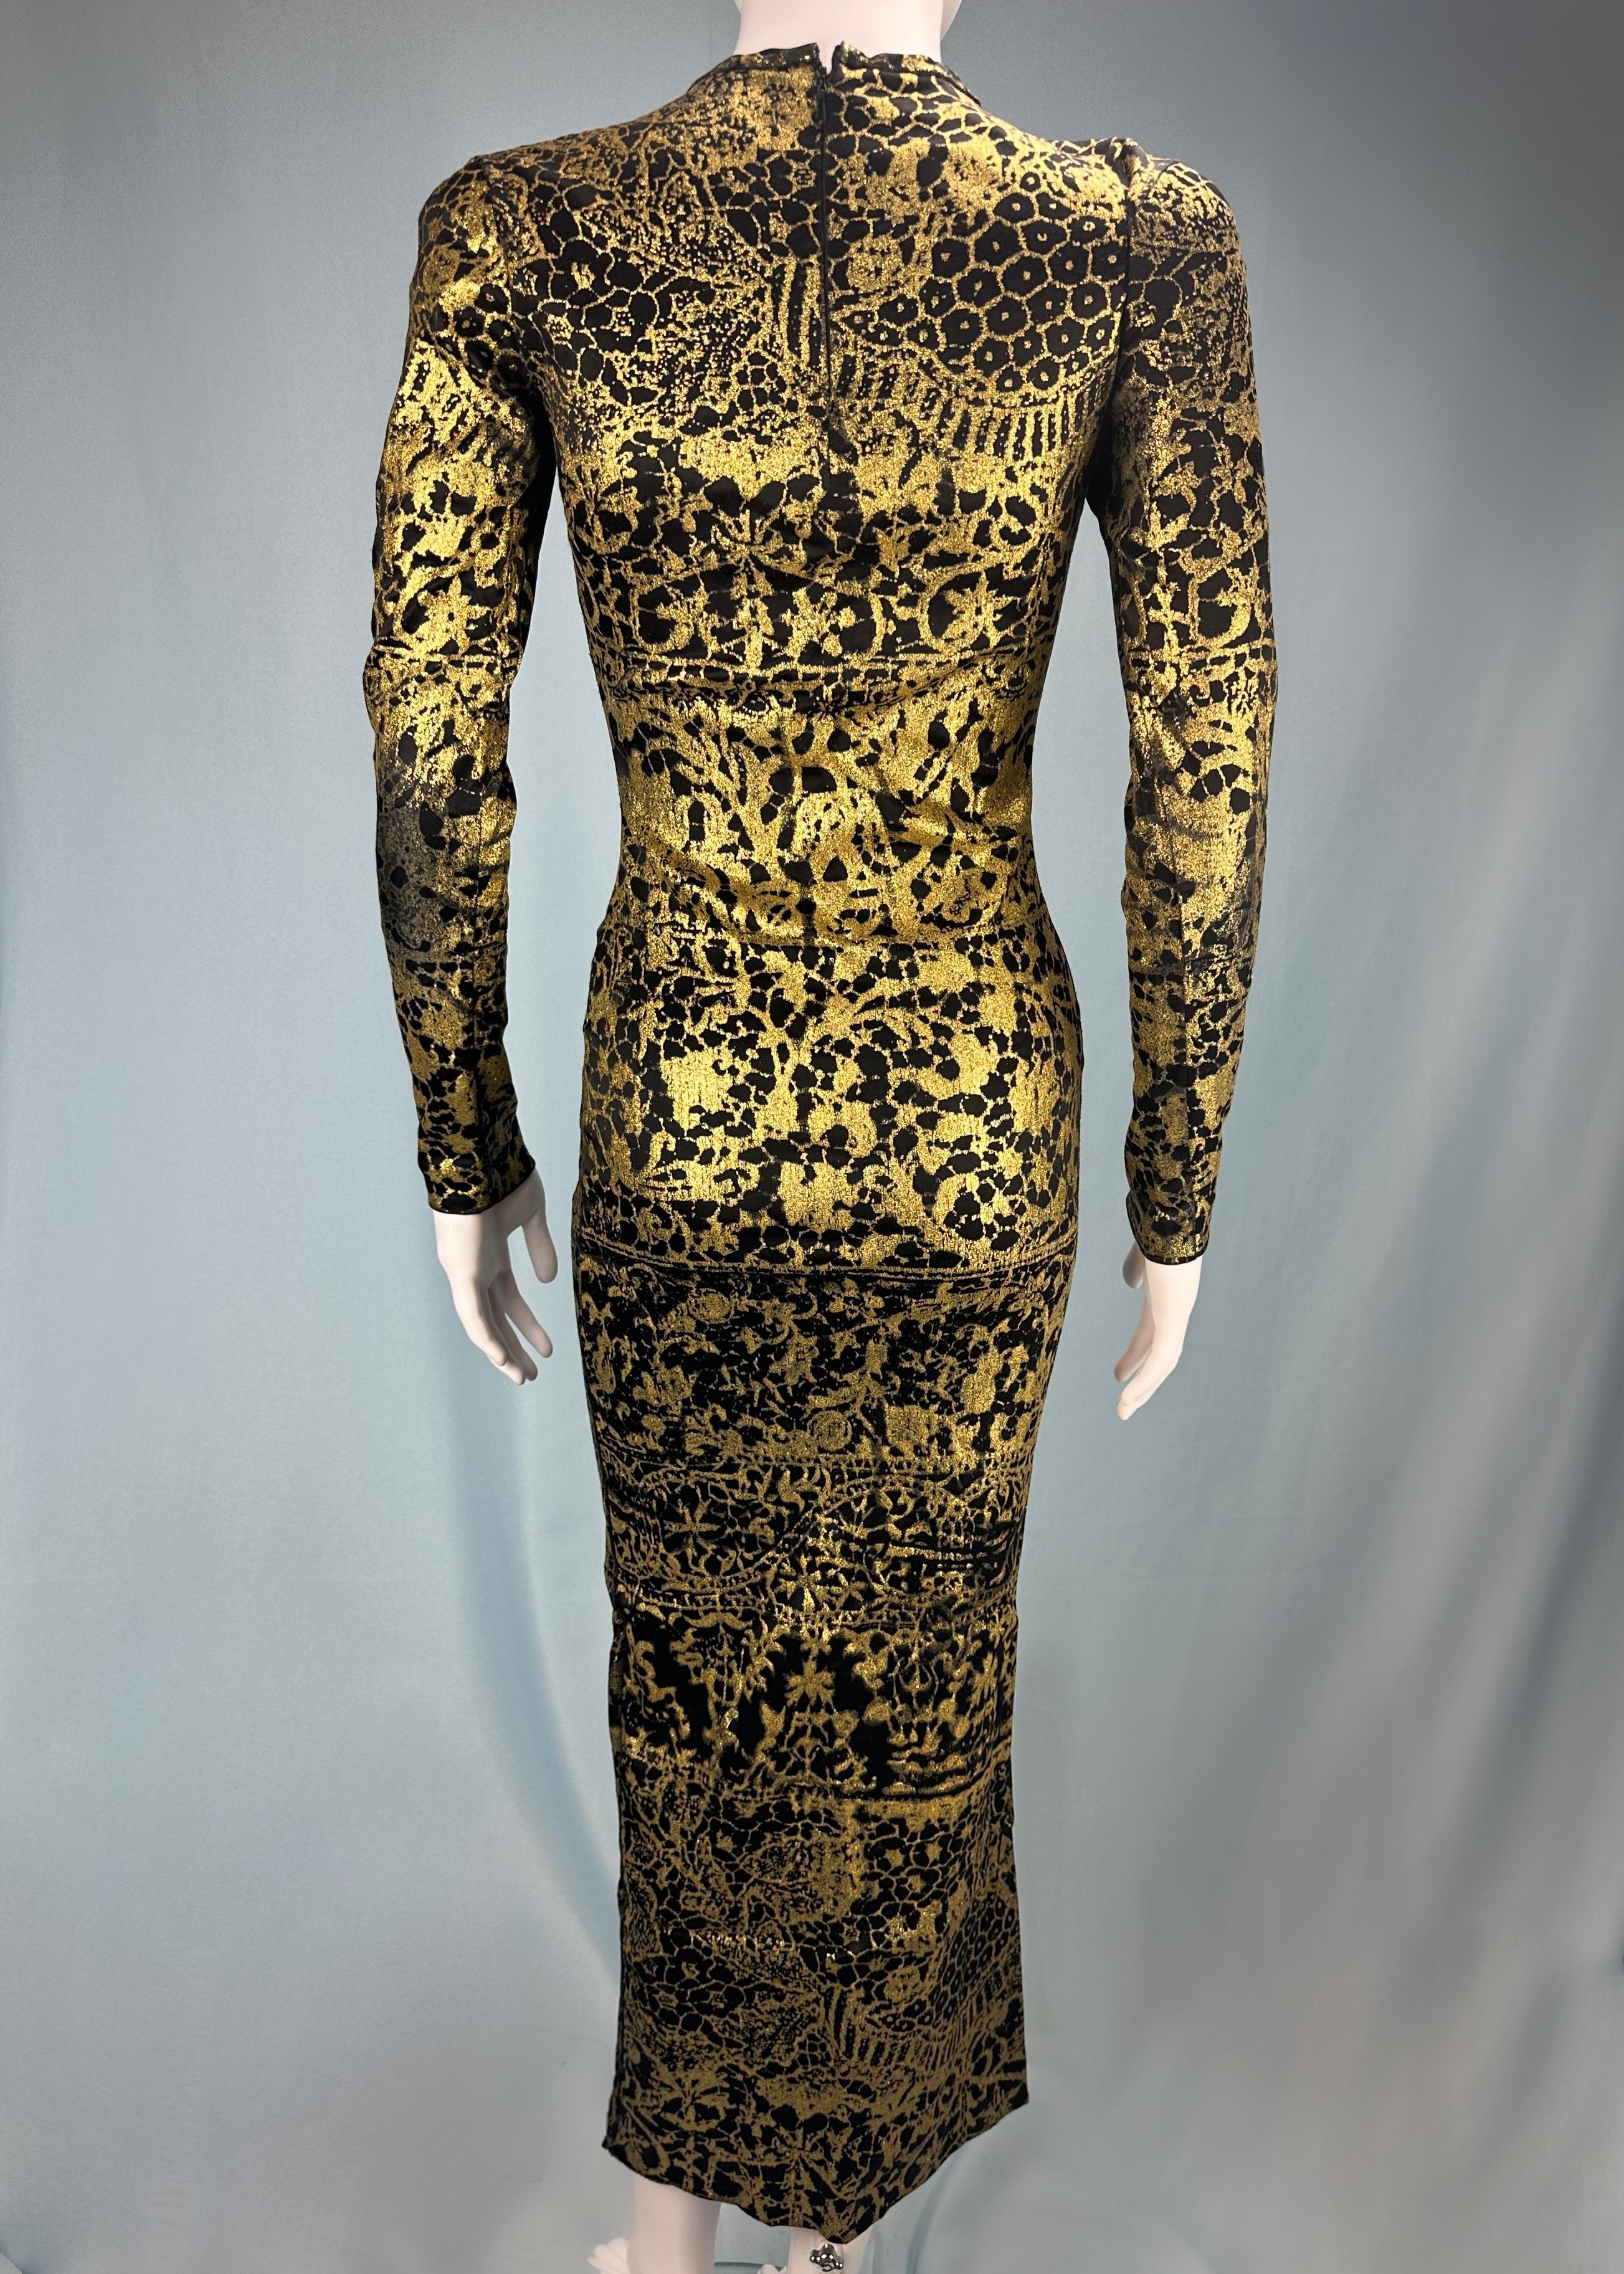 Vintage Vivienne Westwood
Fall 1992 “Always on Camera” collection 

Runway piece - this is the exact dress that was worn by model Anna Bayle on the Fall 1992 runway 

Black full length dress with gold glitter pattern all over
Stretch fabric
Long